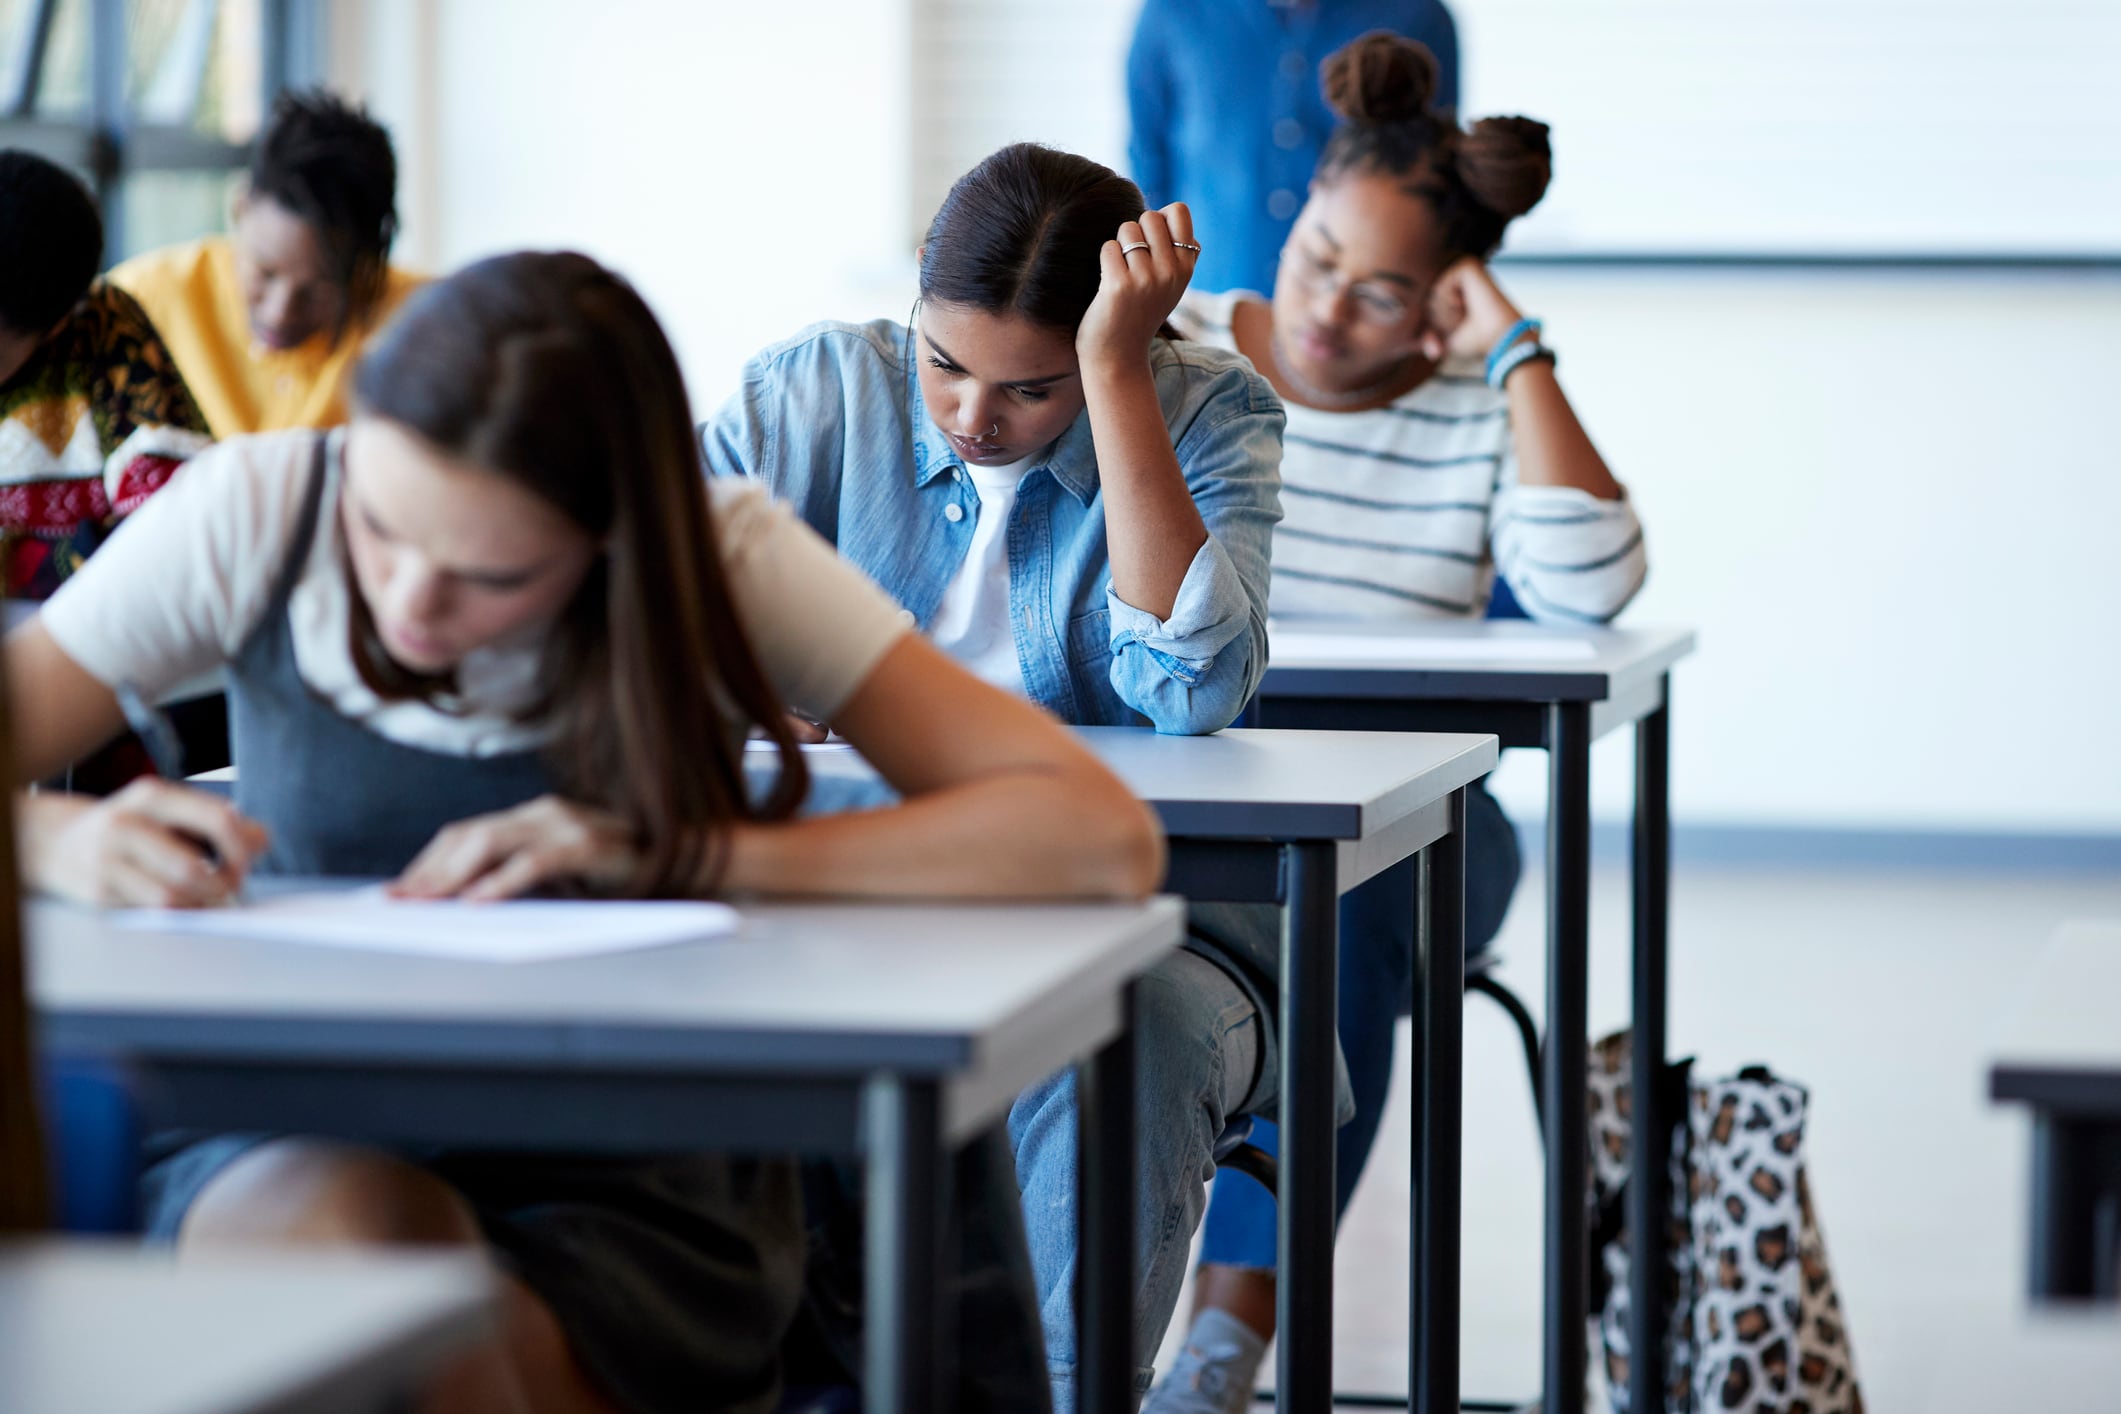 Students take a test at their desks in a classroom.